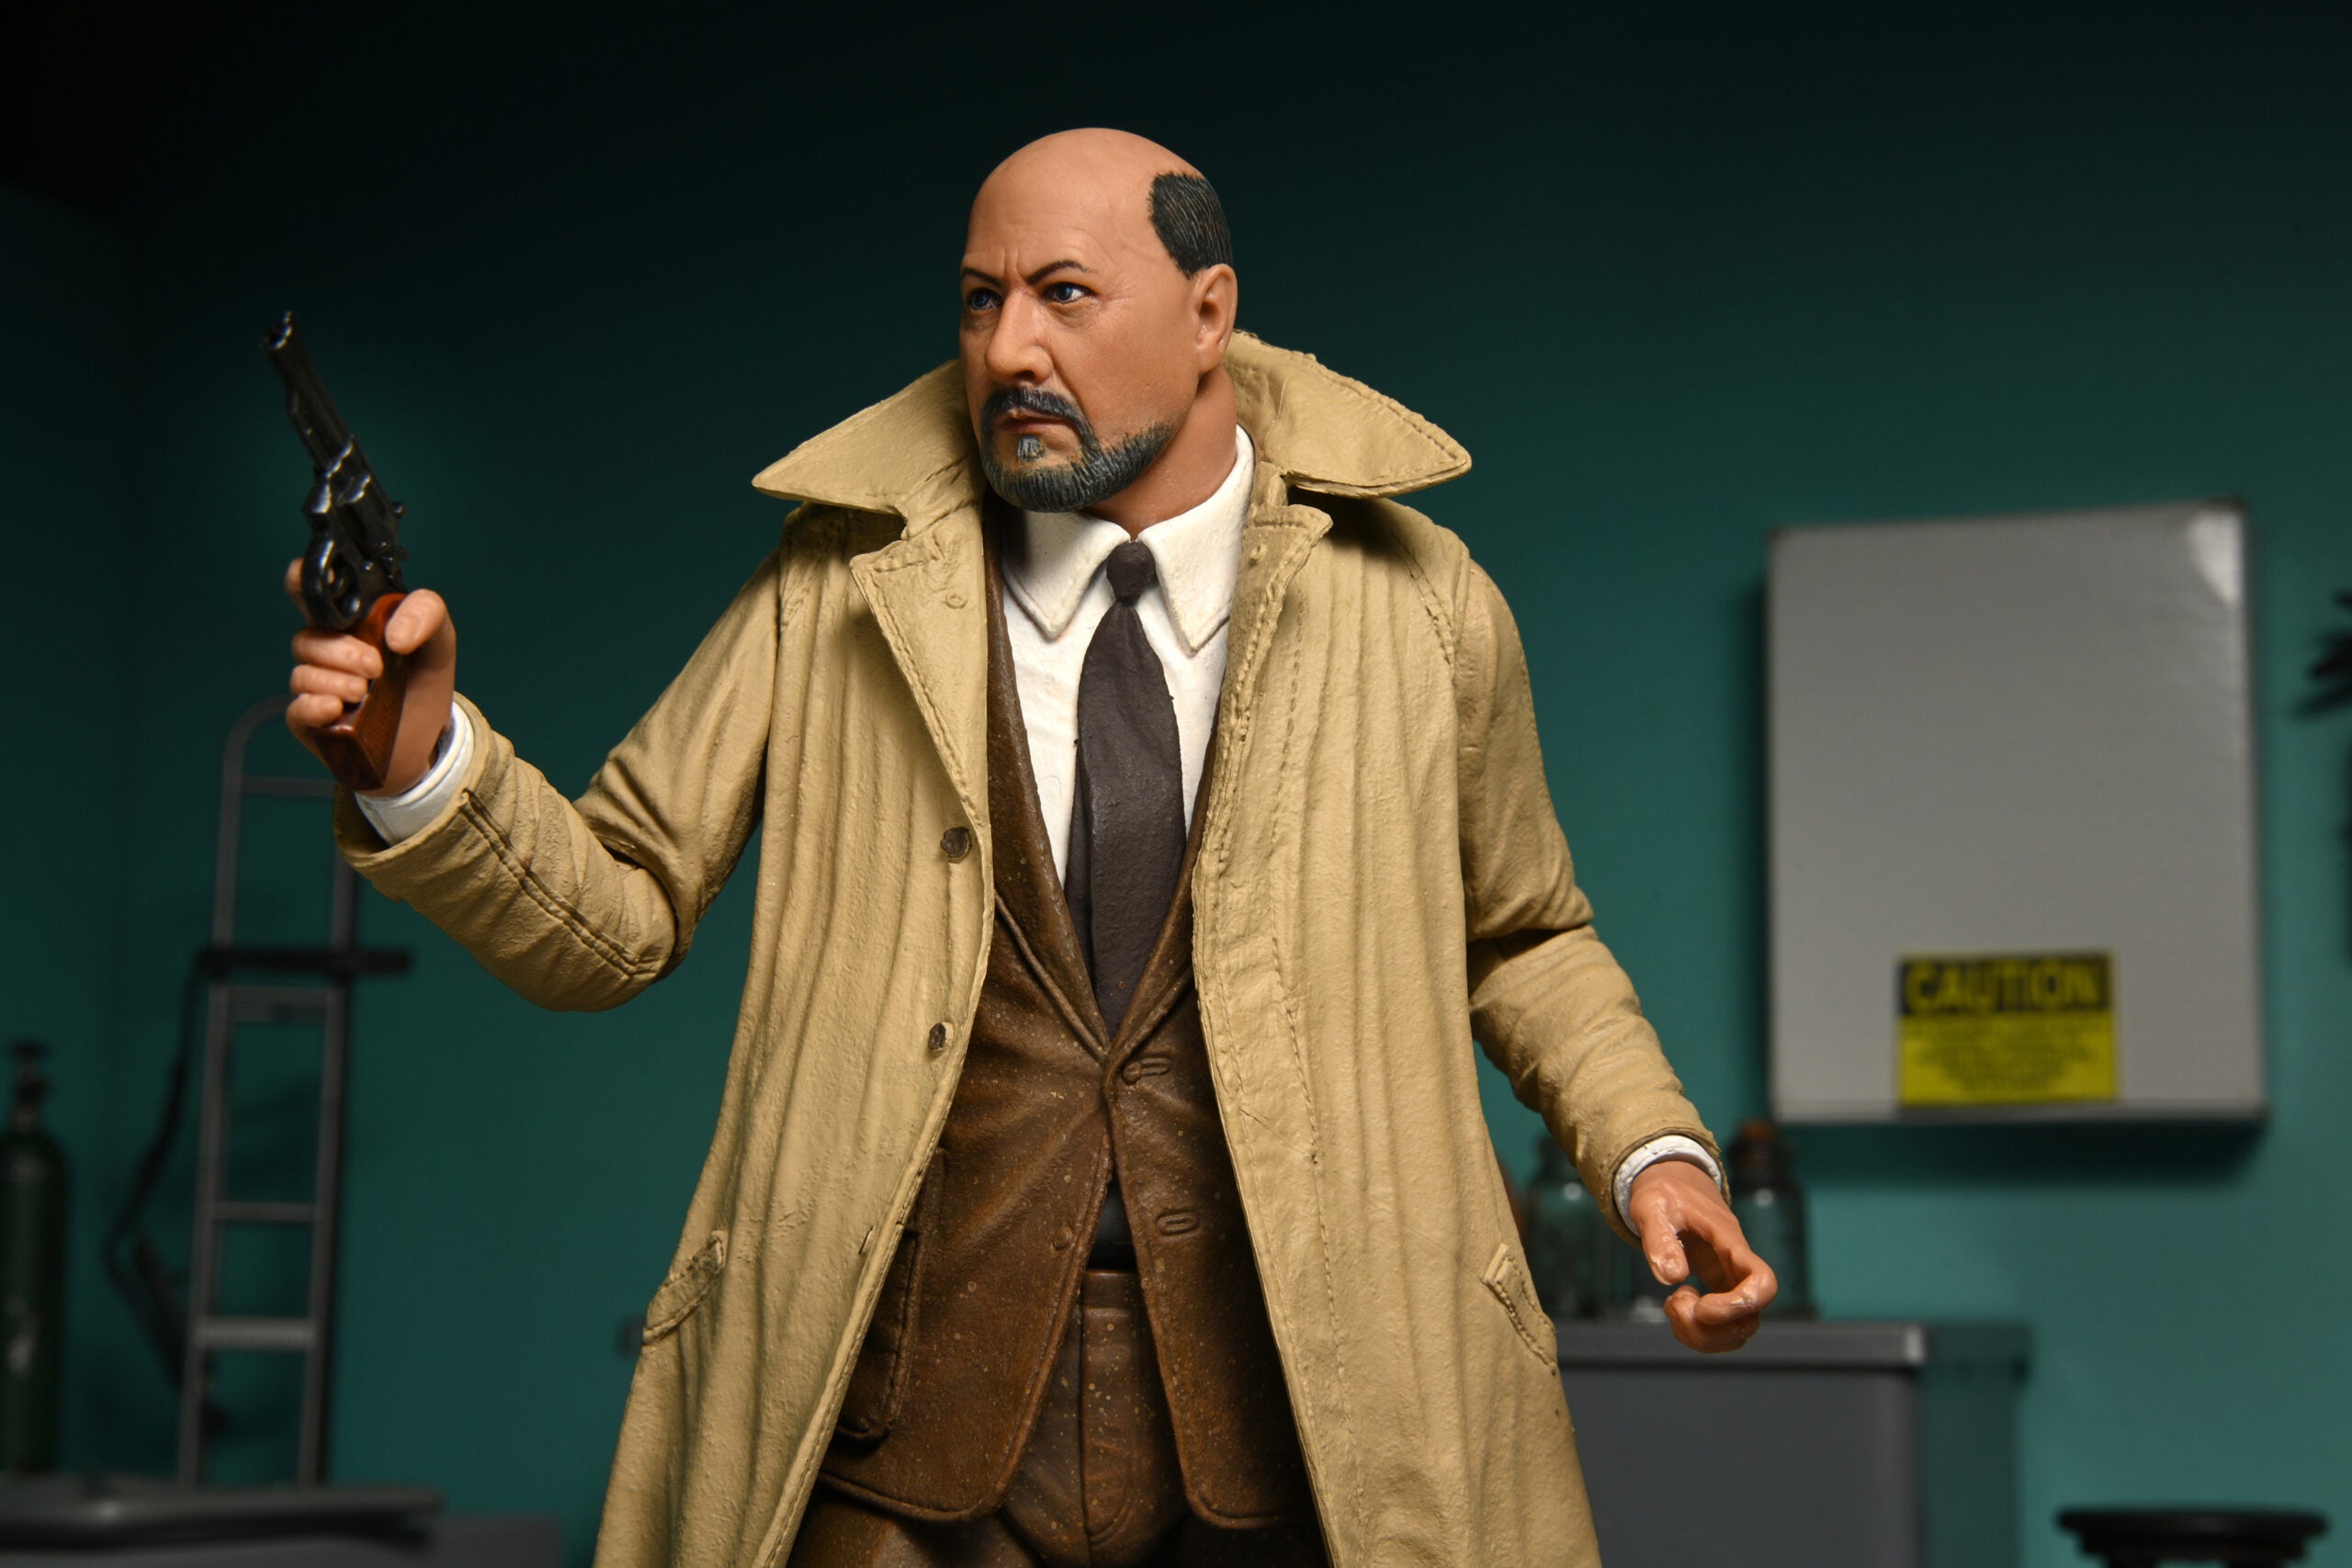 This is a NECA Halloween 2 Michael Myers and Loomis action figure set and Loomis has a tan coat, brown suit, brown tie, holding a gun. 